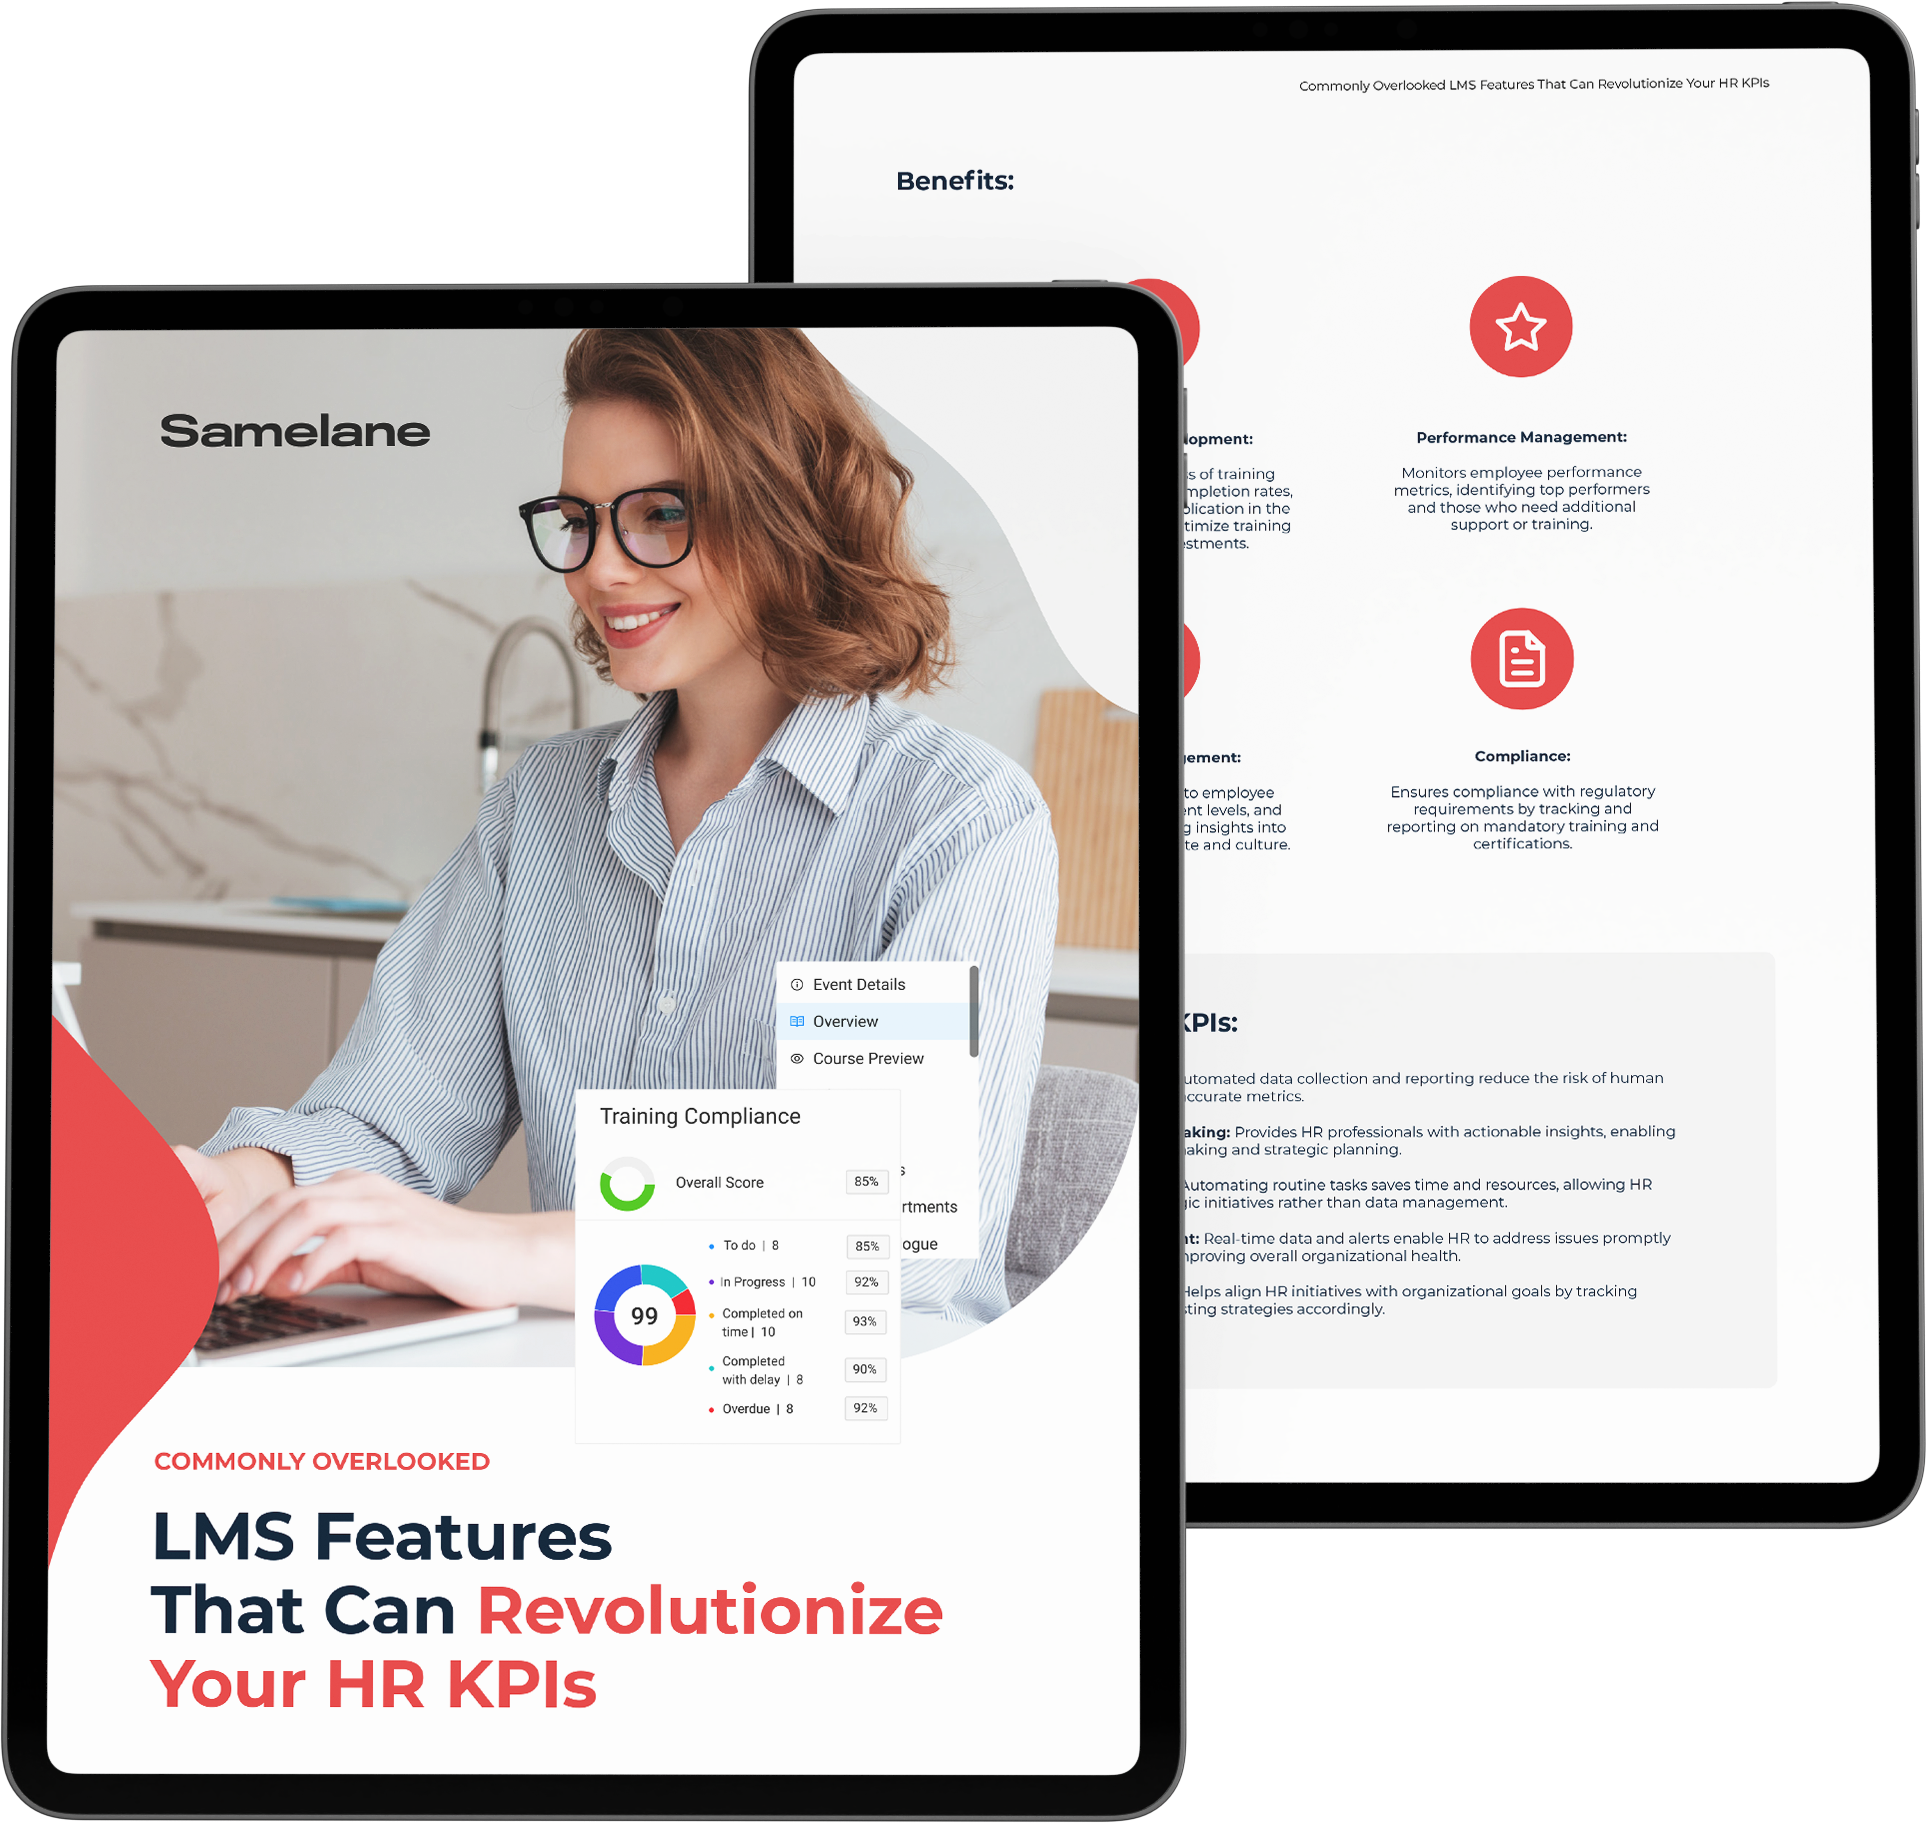 Commonly overlooked lms features that can revolutionize your hr kpis